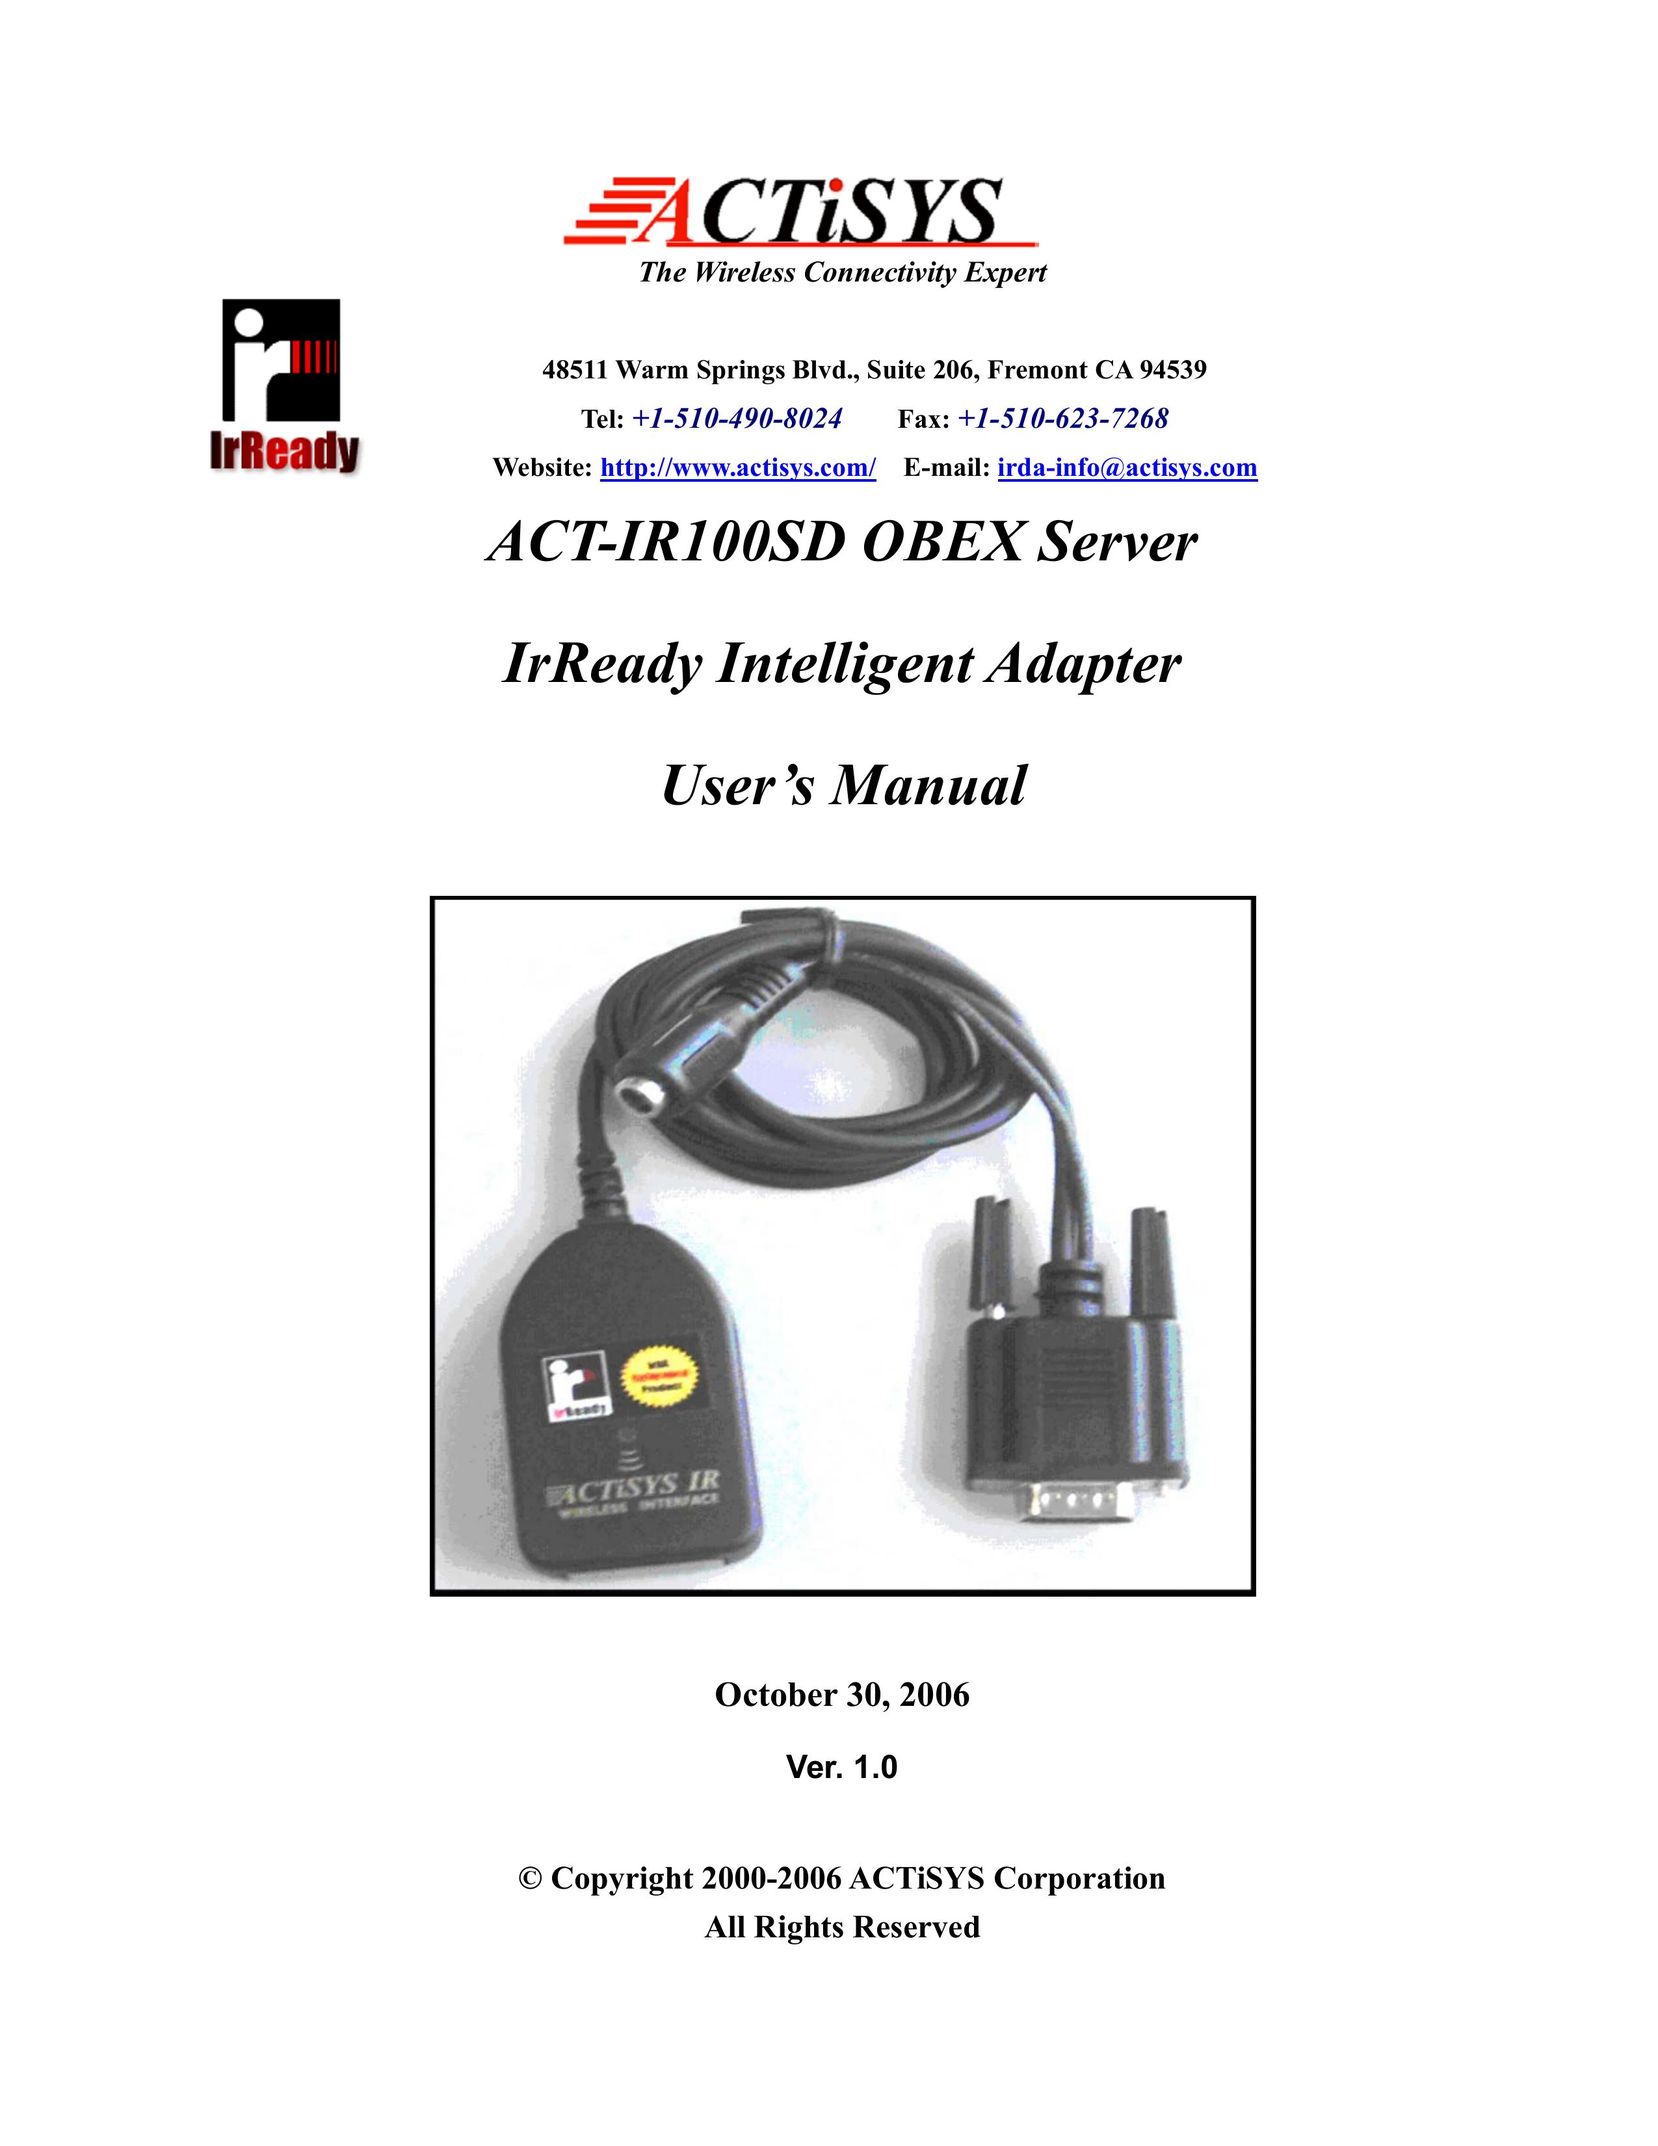 ACTiSYS ACT-IR100SD Network Card User Manual (Page 1)